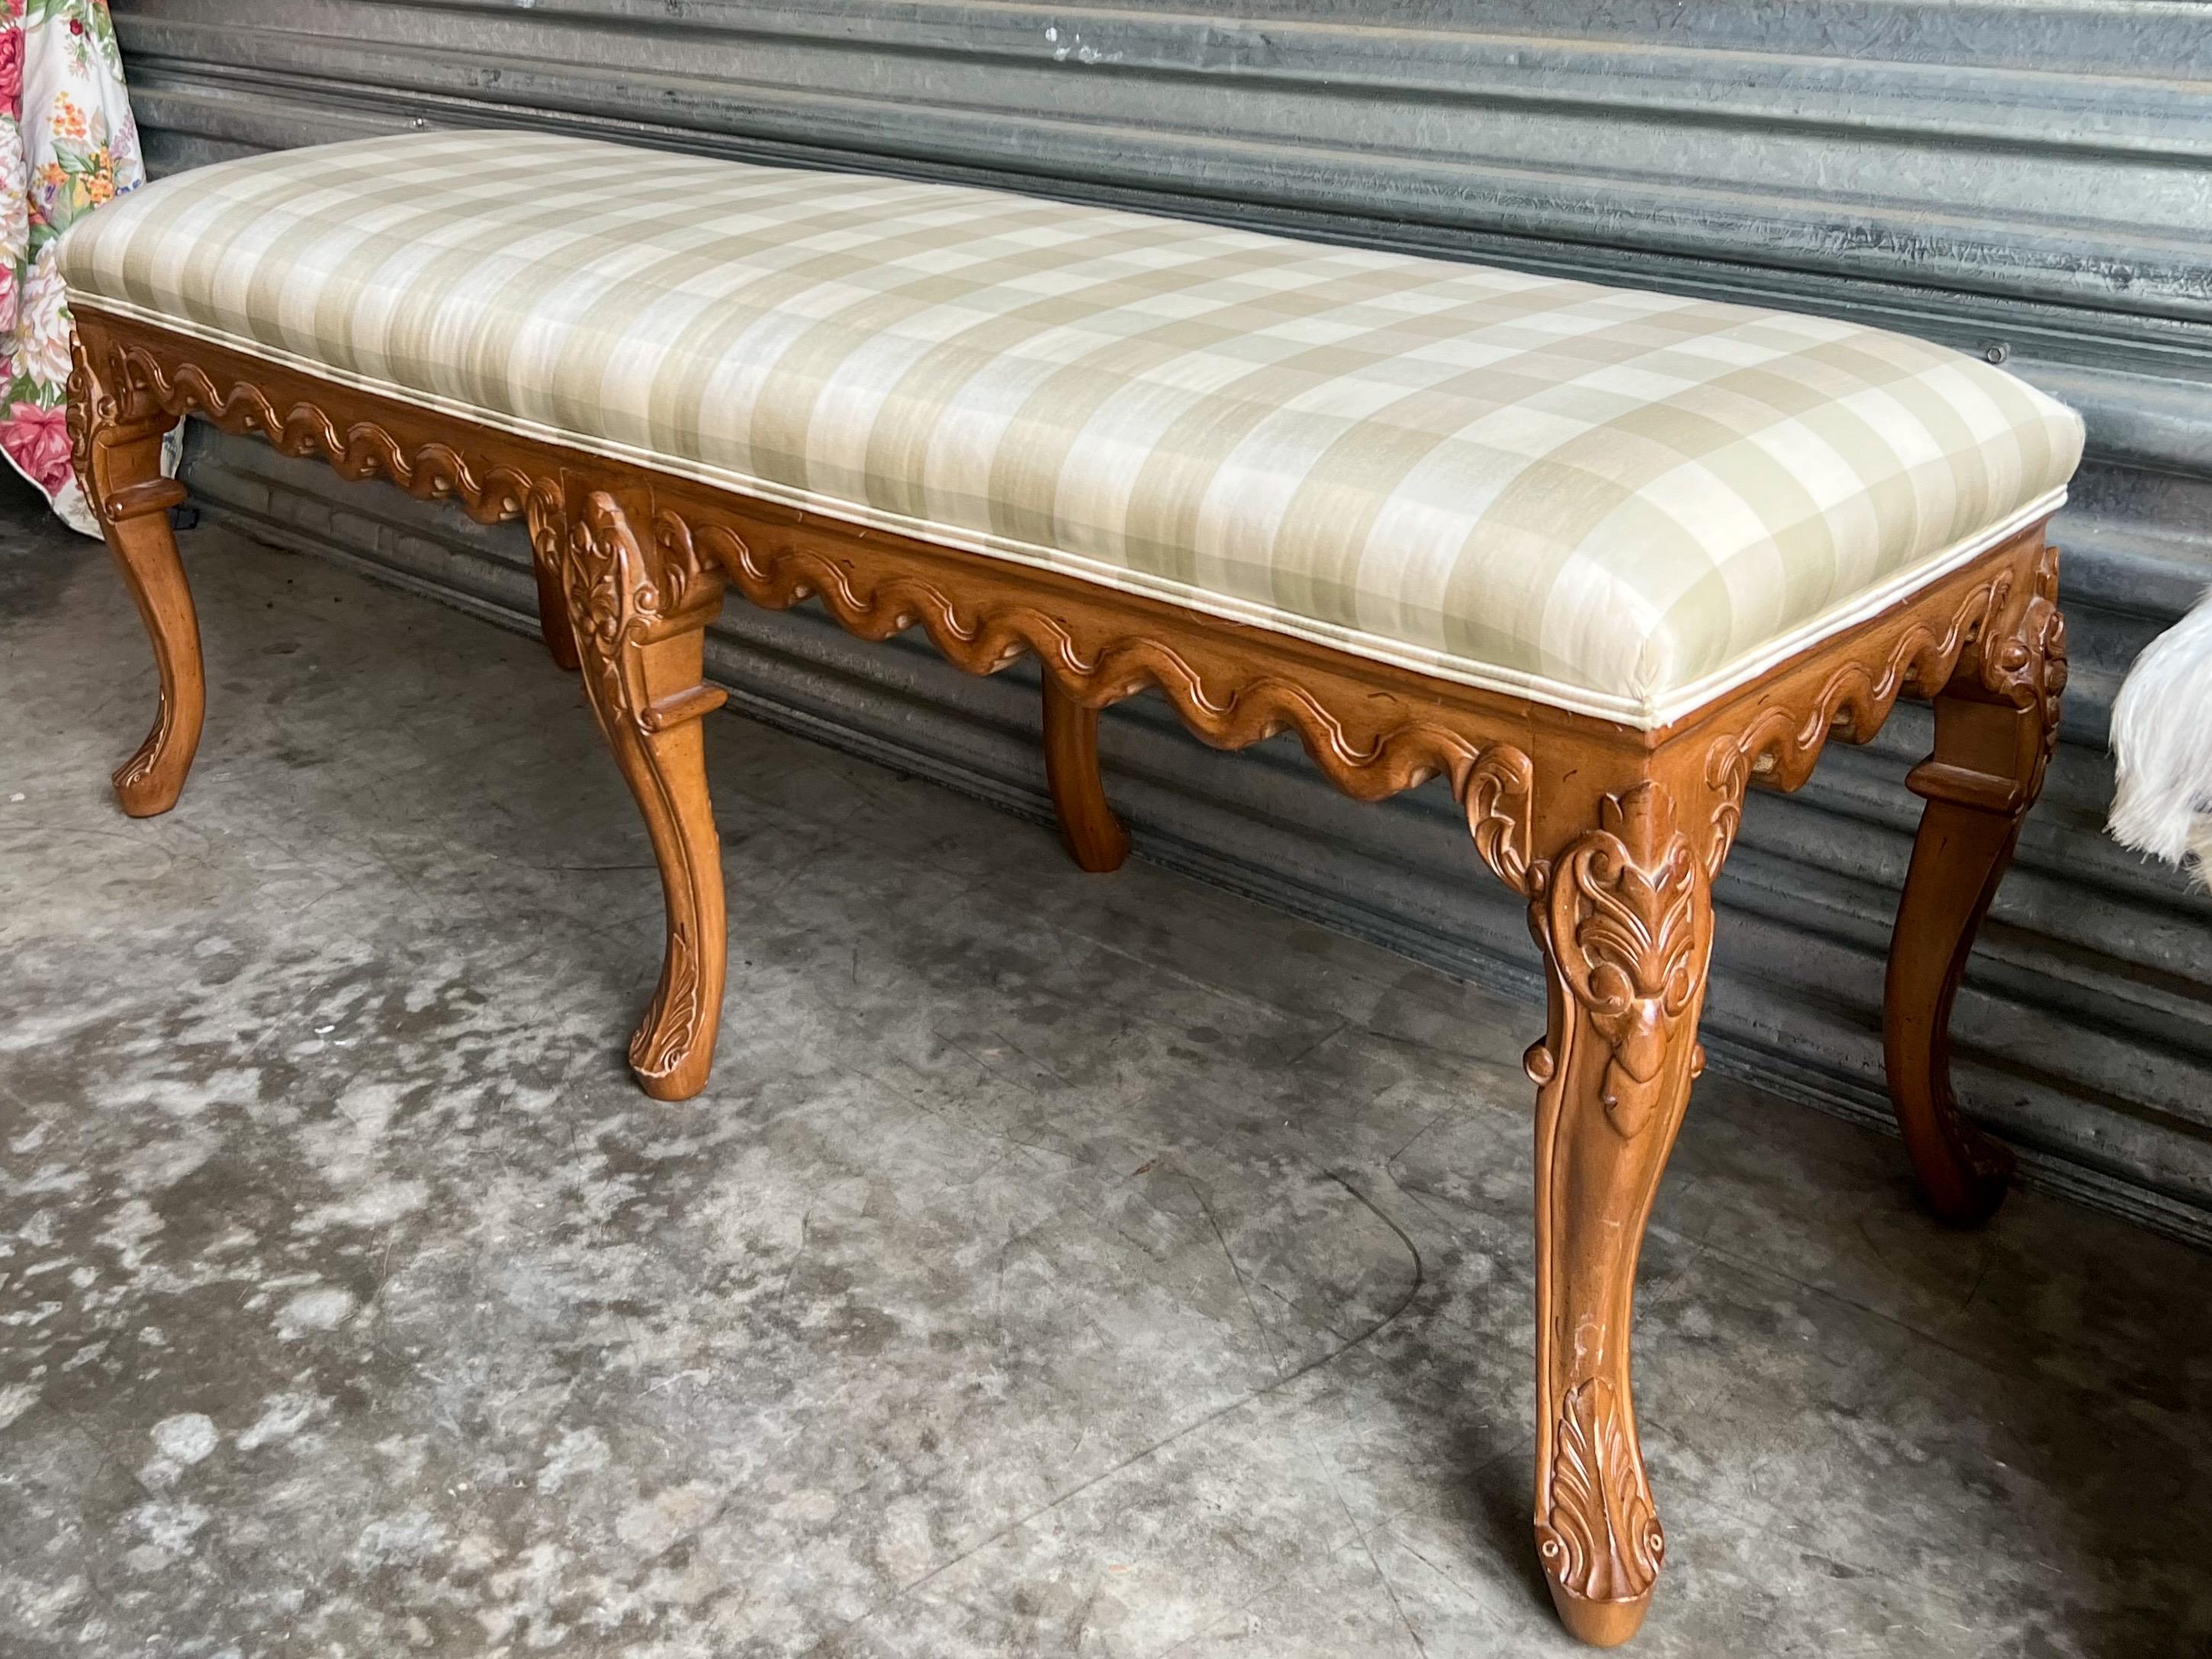 Upholstery 1940s French Carved Fruitwood Bench with Six Legs For Sale